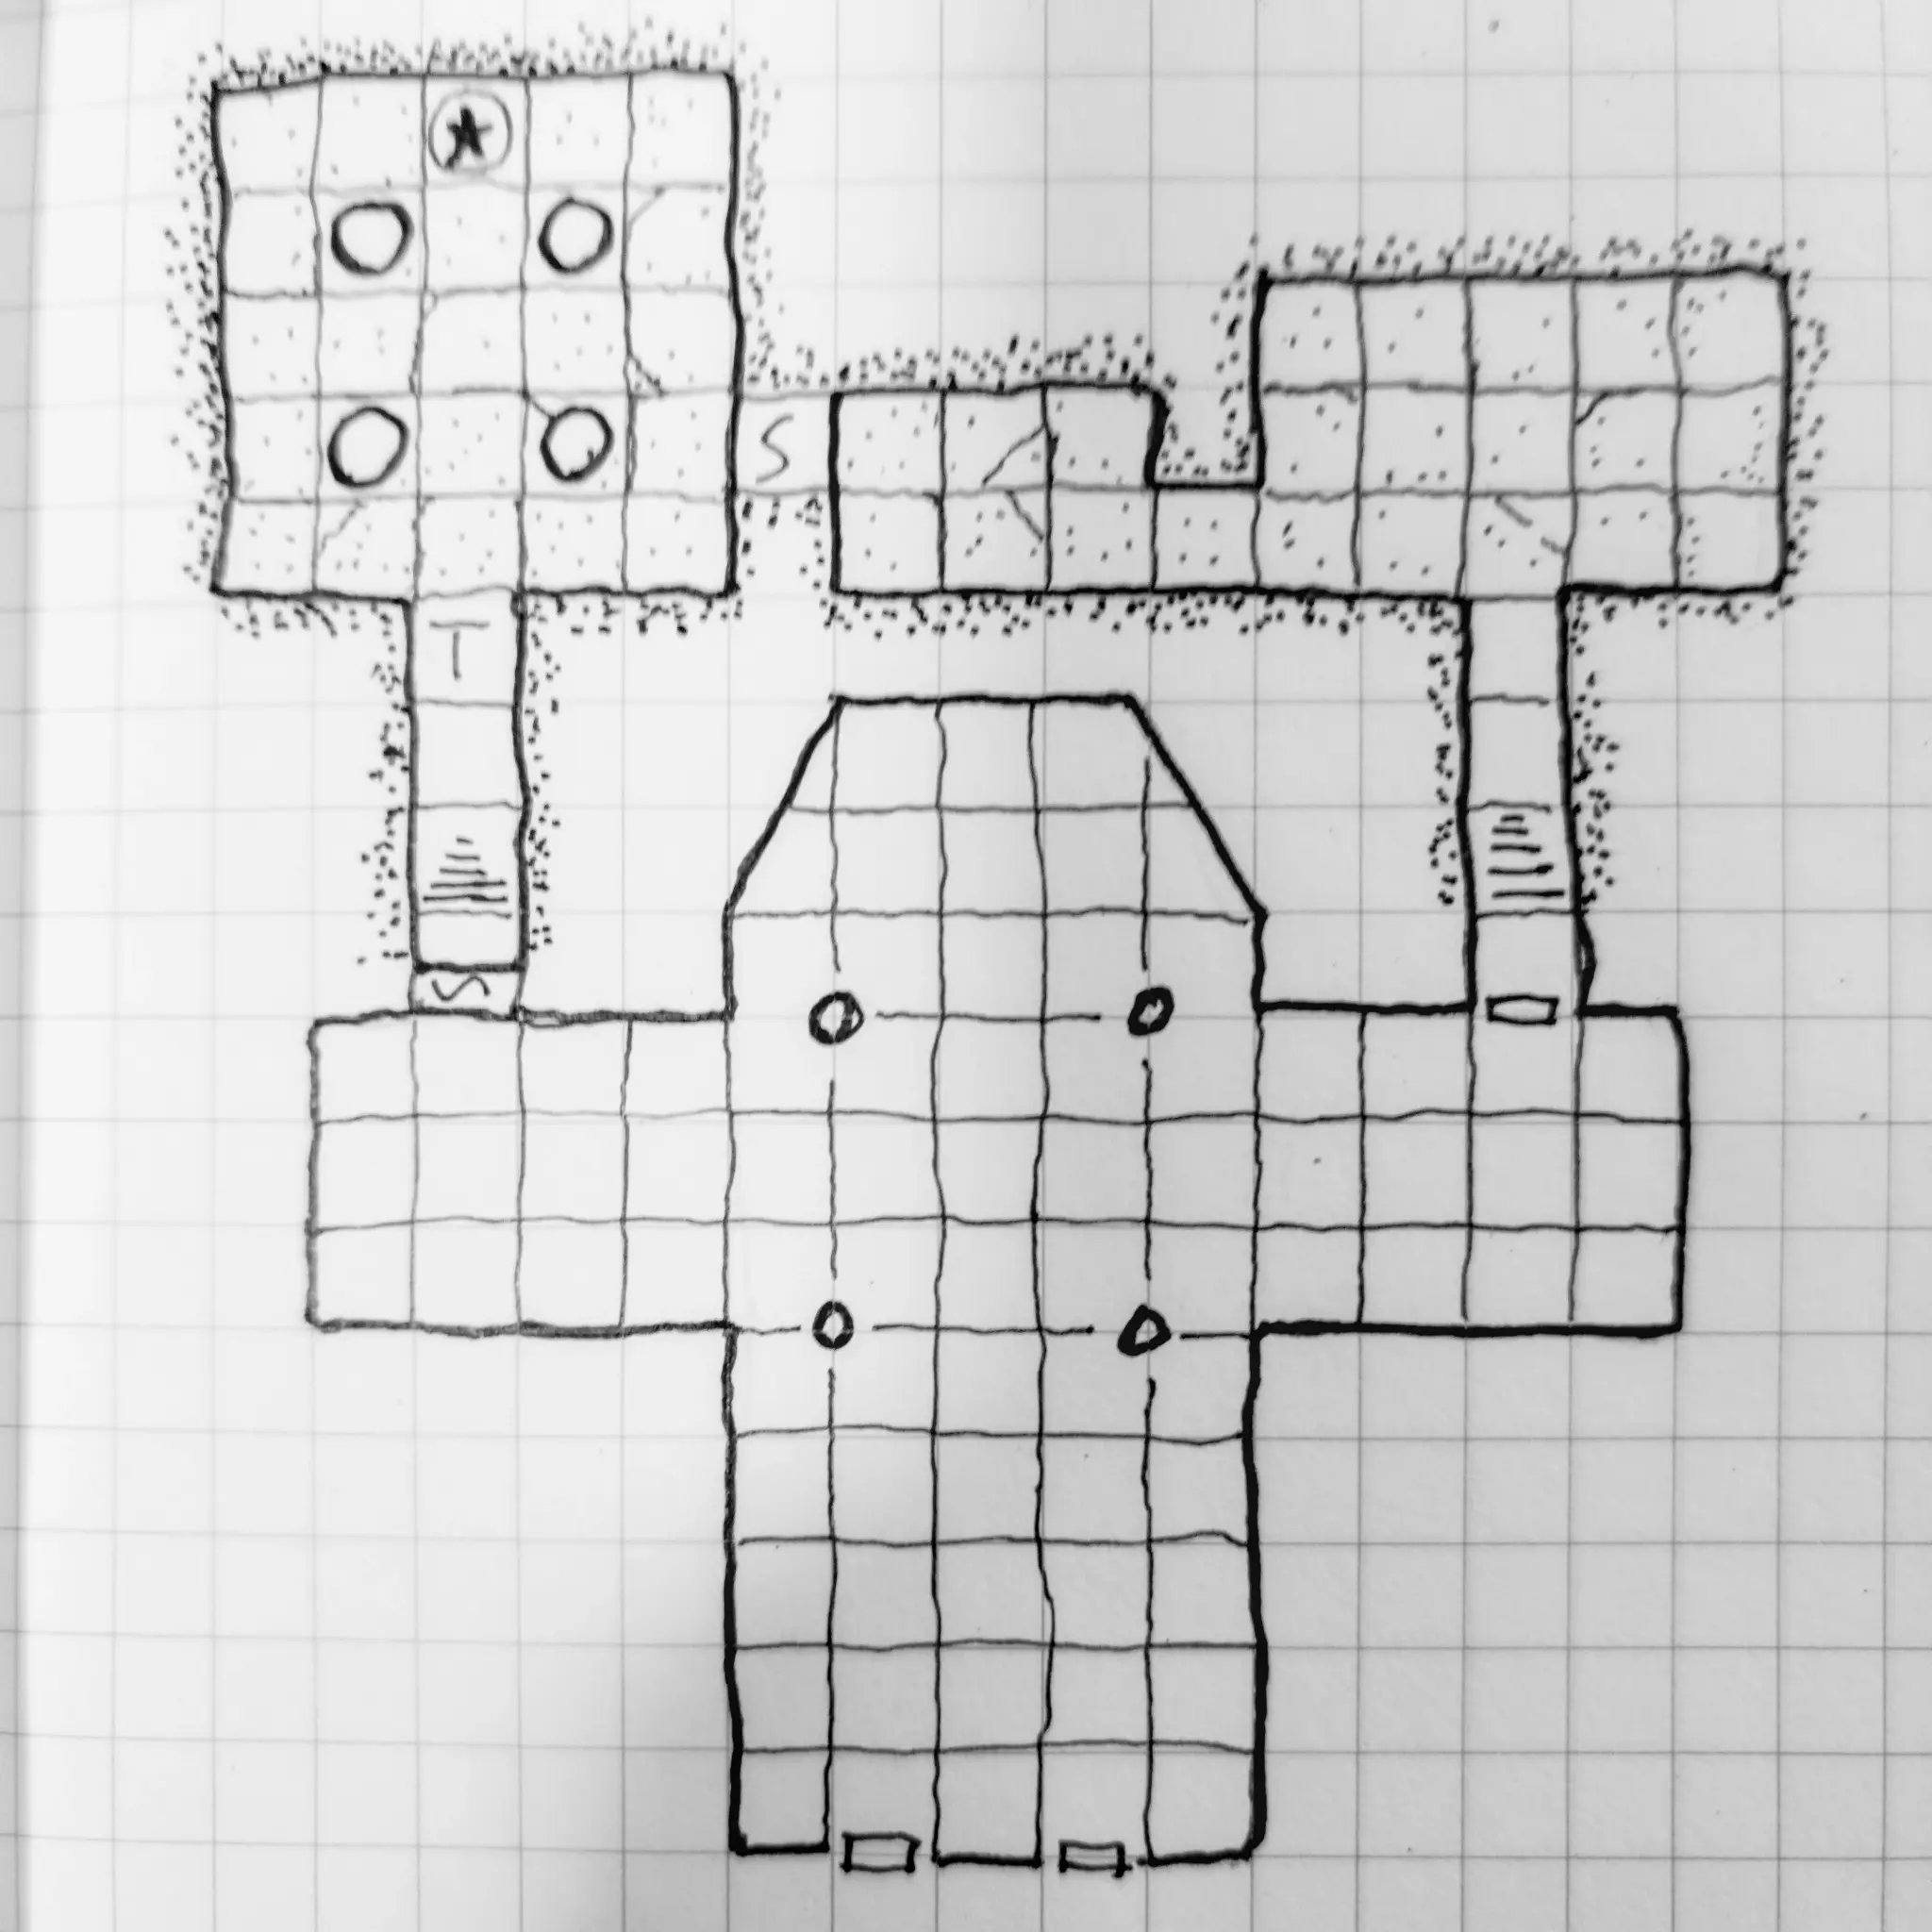 A dungeon map of a cross-shaped building, with some secret rooms to the North